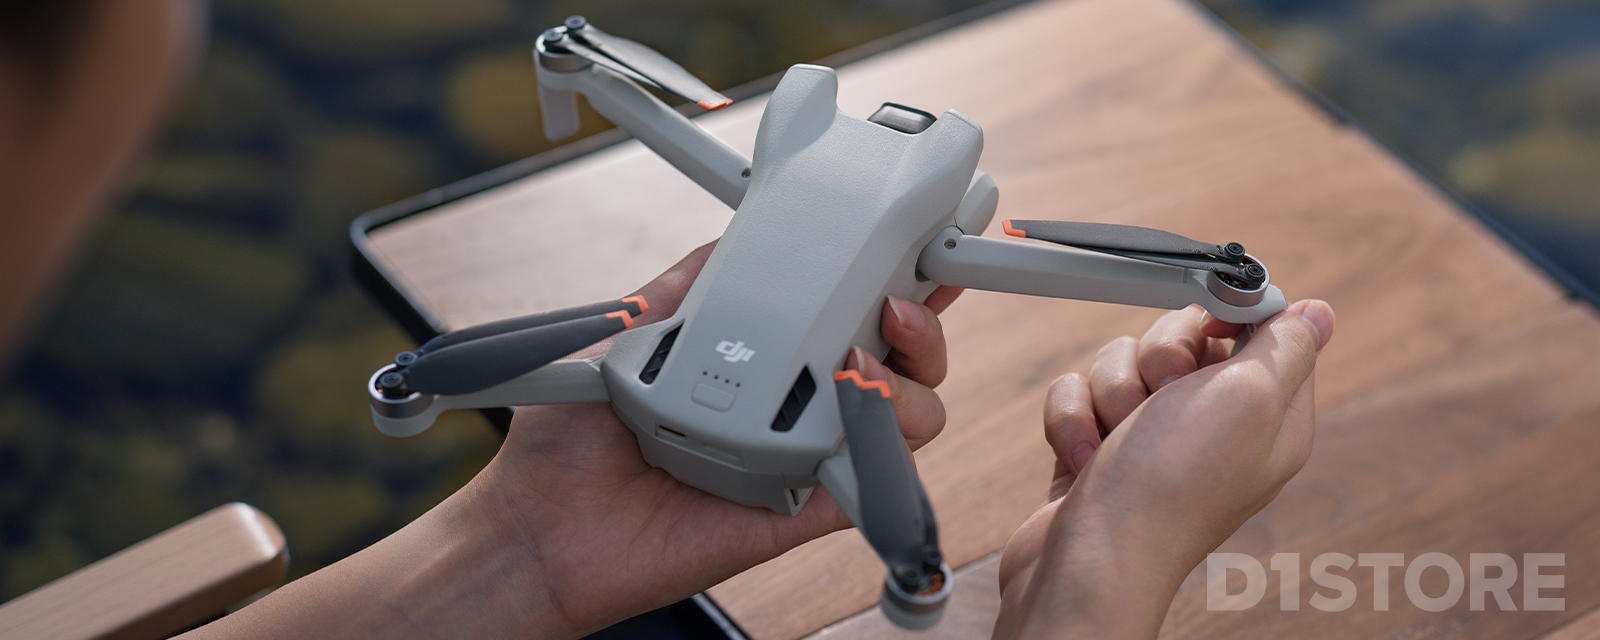 DJI RC Controller: What Drones Are Compatible? | D1 Lounge